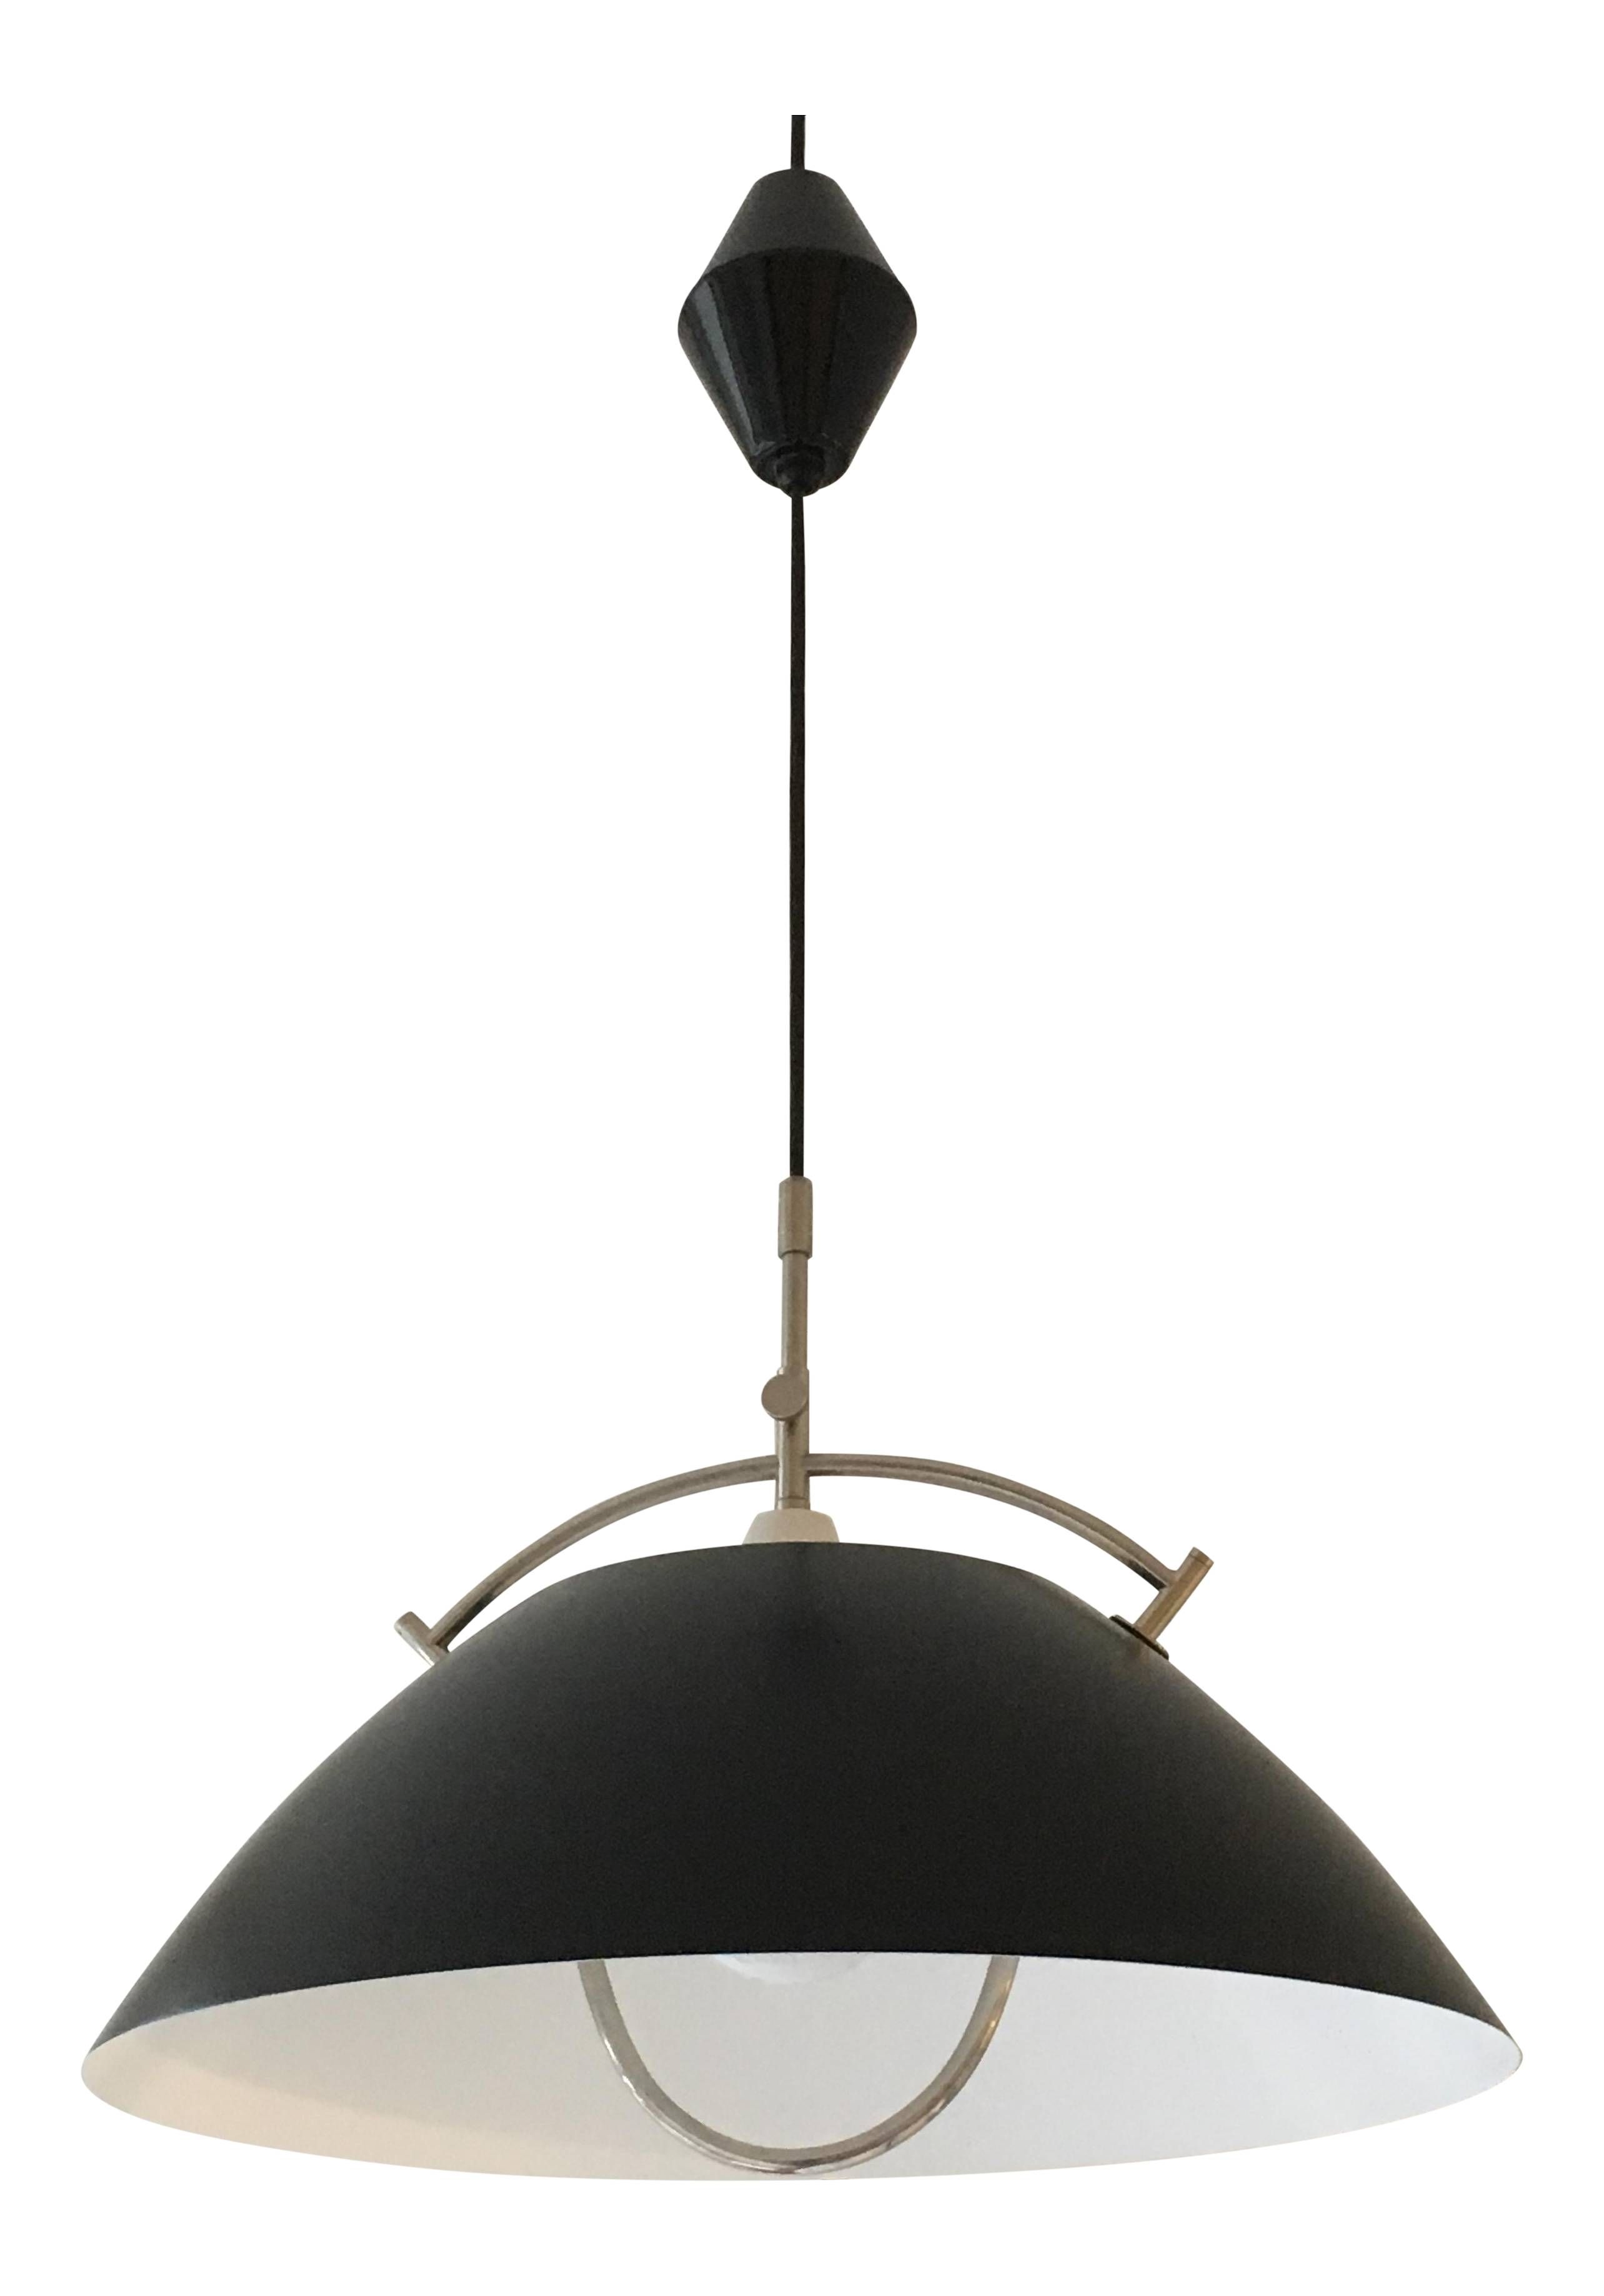 Awesome Retractable Ceiling Light 60 With Additional Led Ceiling With Retractable Pendant Lights Fixtures (View 2 of 15)